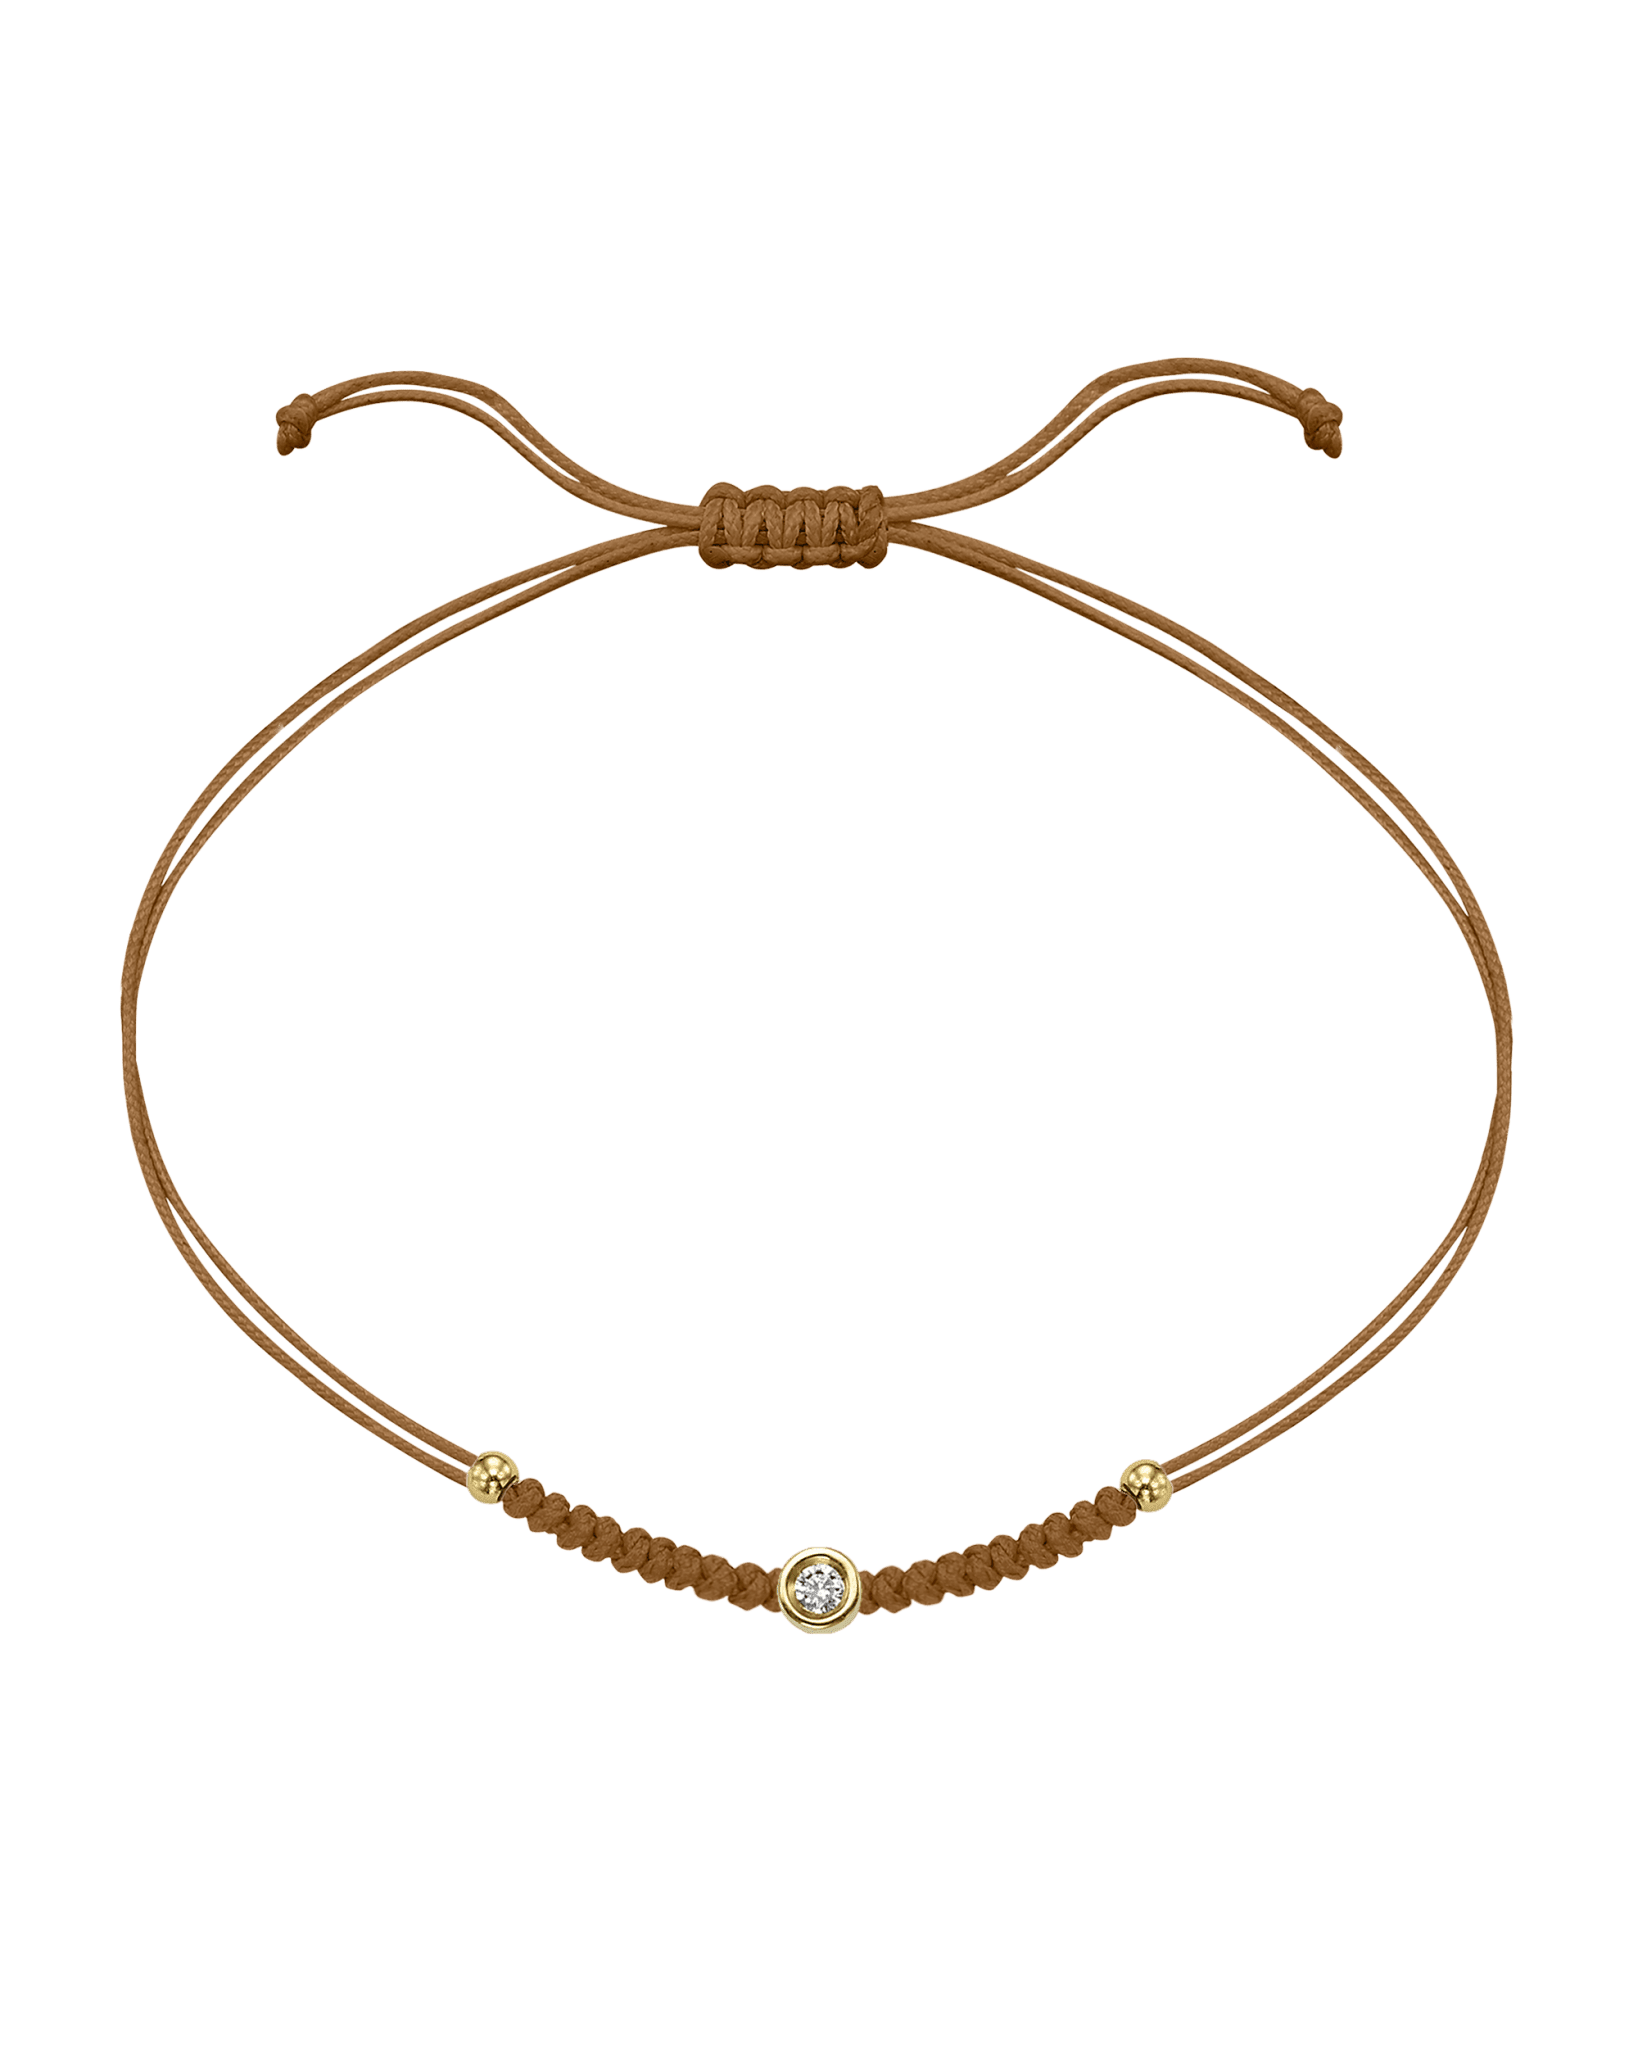 Solid Gold Sphere String of Love - 14K Yellow Gold Bracelet 14K Solid Gold Camel Small: 0.03ct 